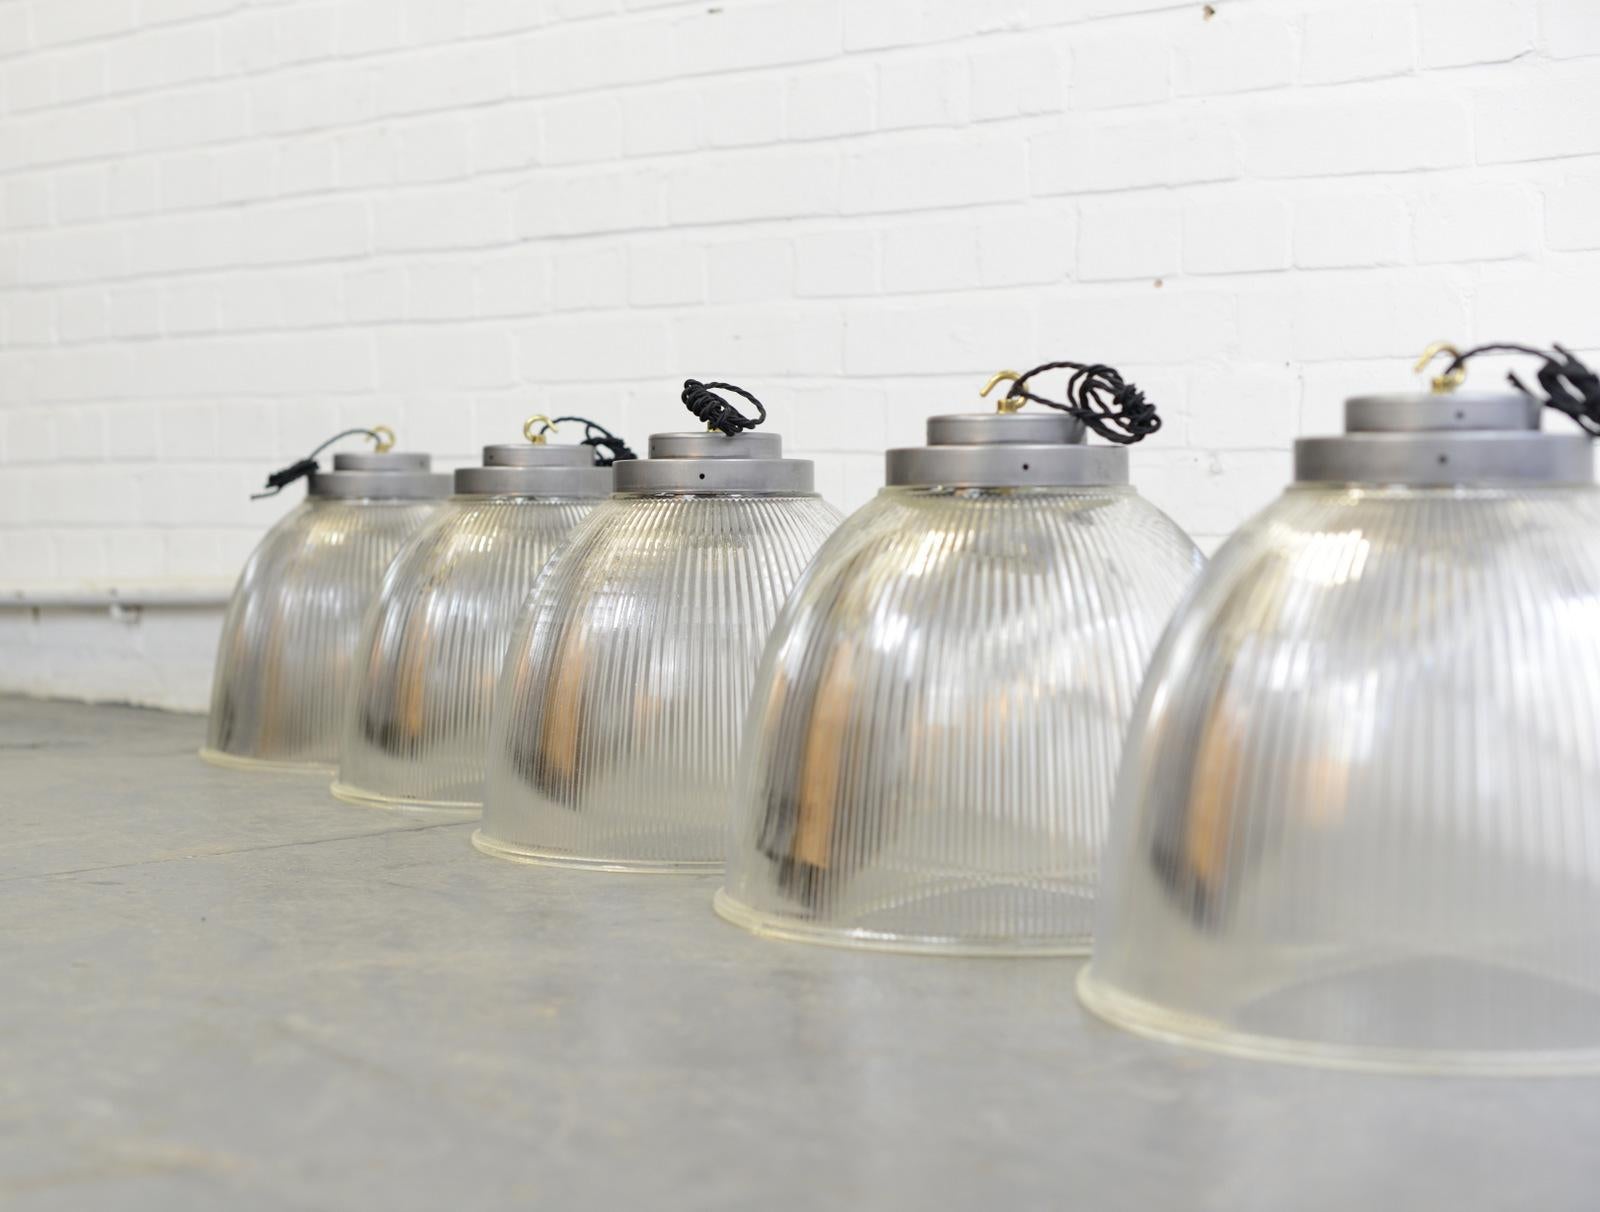 Large industrial Holophane pendant lights, circa 1950s

- Price is per light
- Heavy prismatic glass
- Stamped 